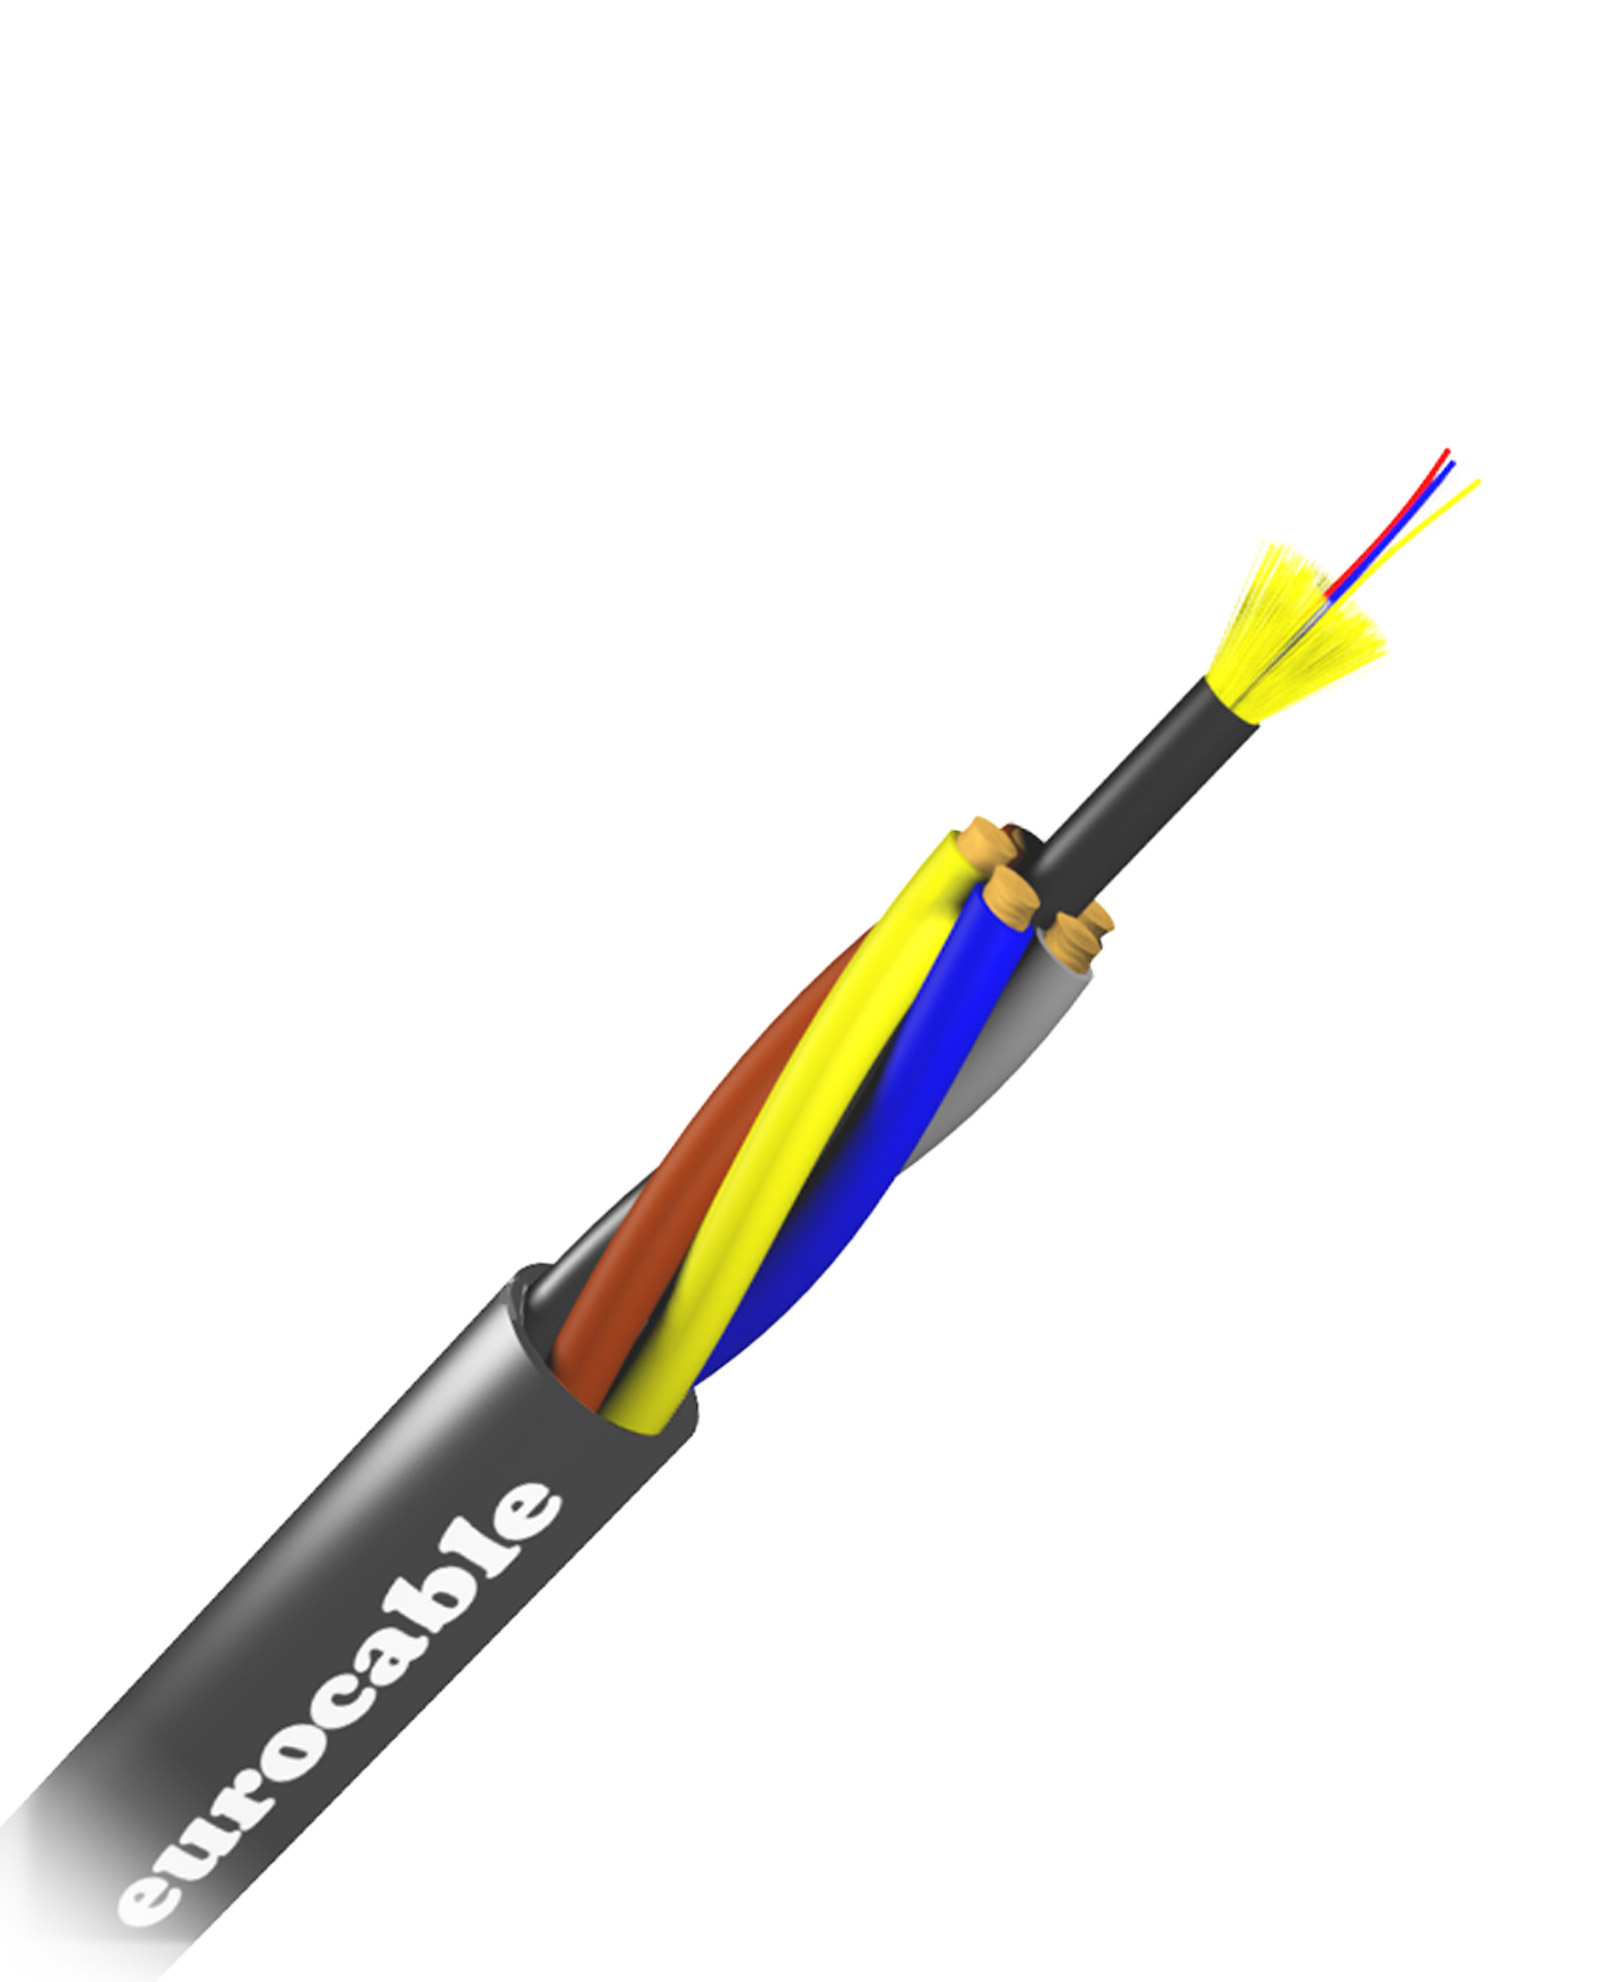 Eurocable Hybrid Optical Cable